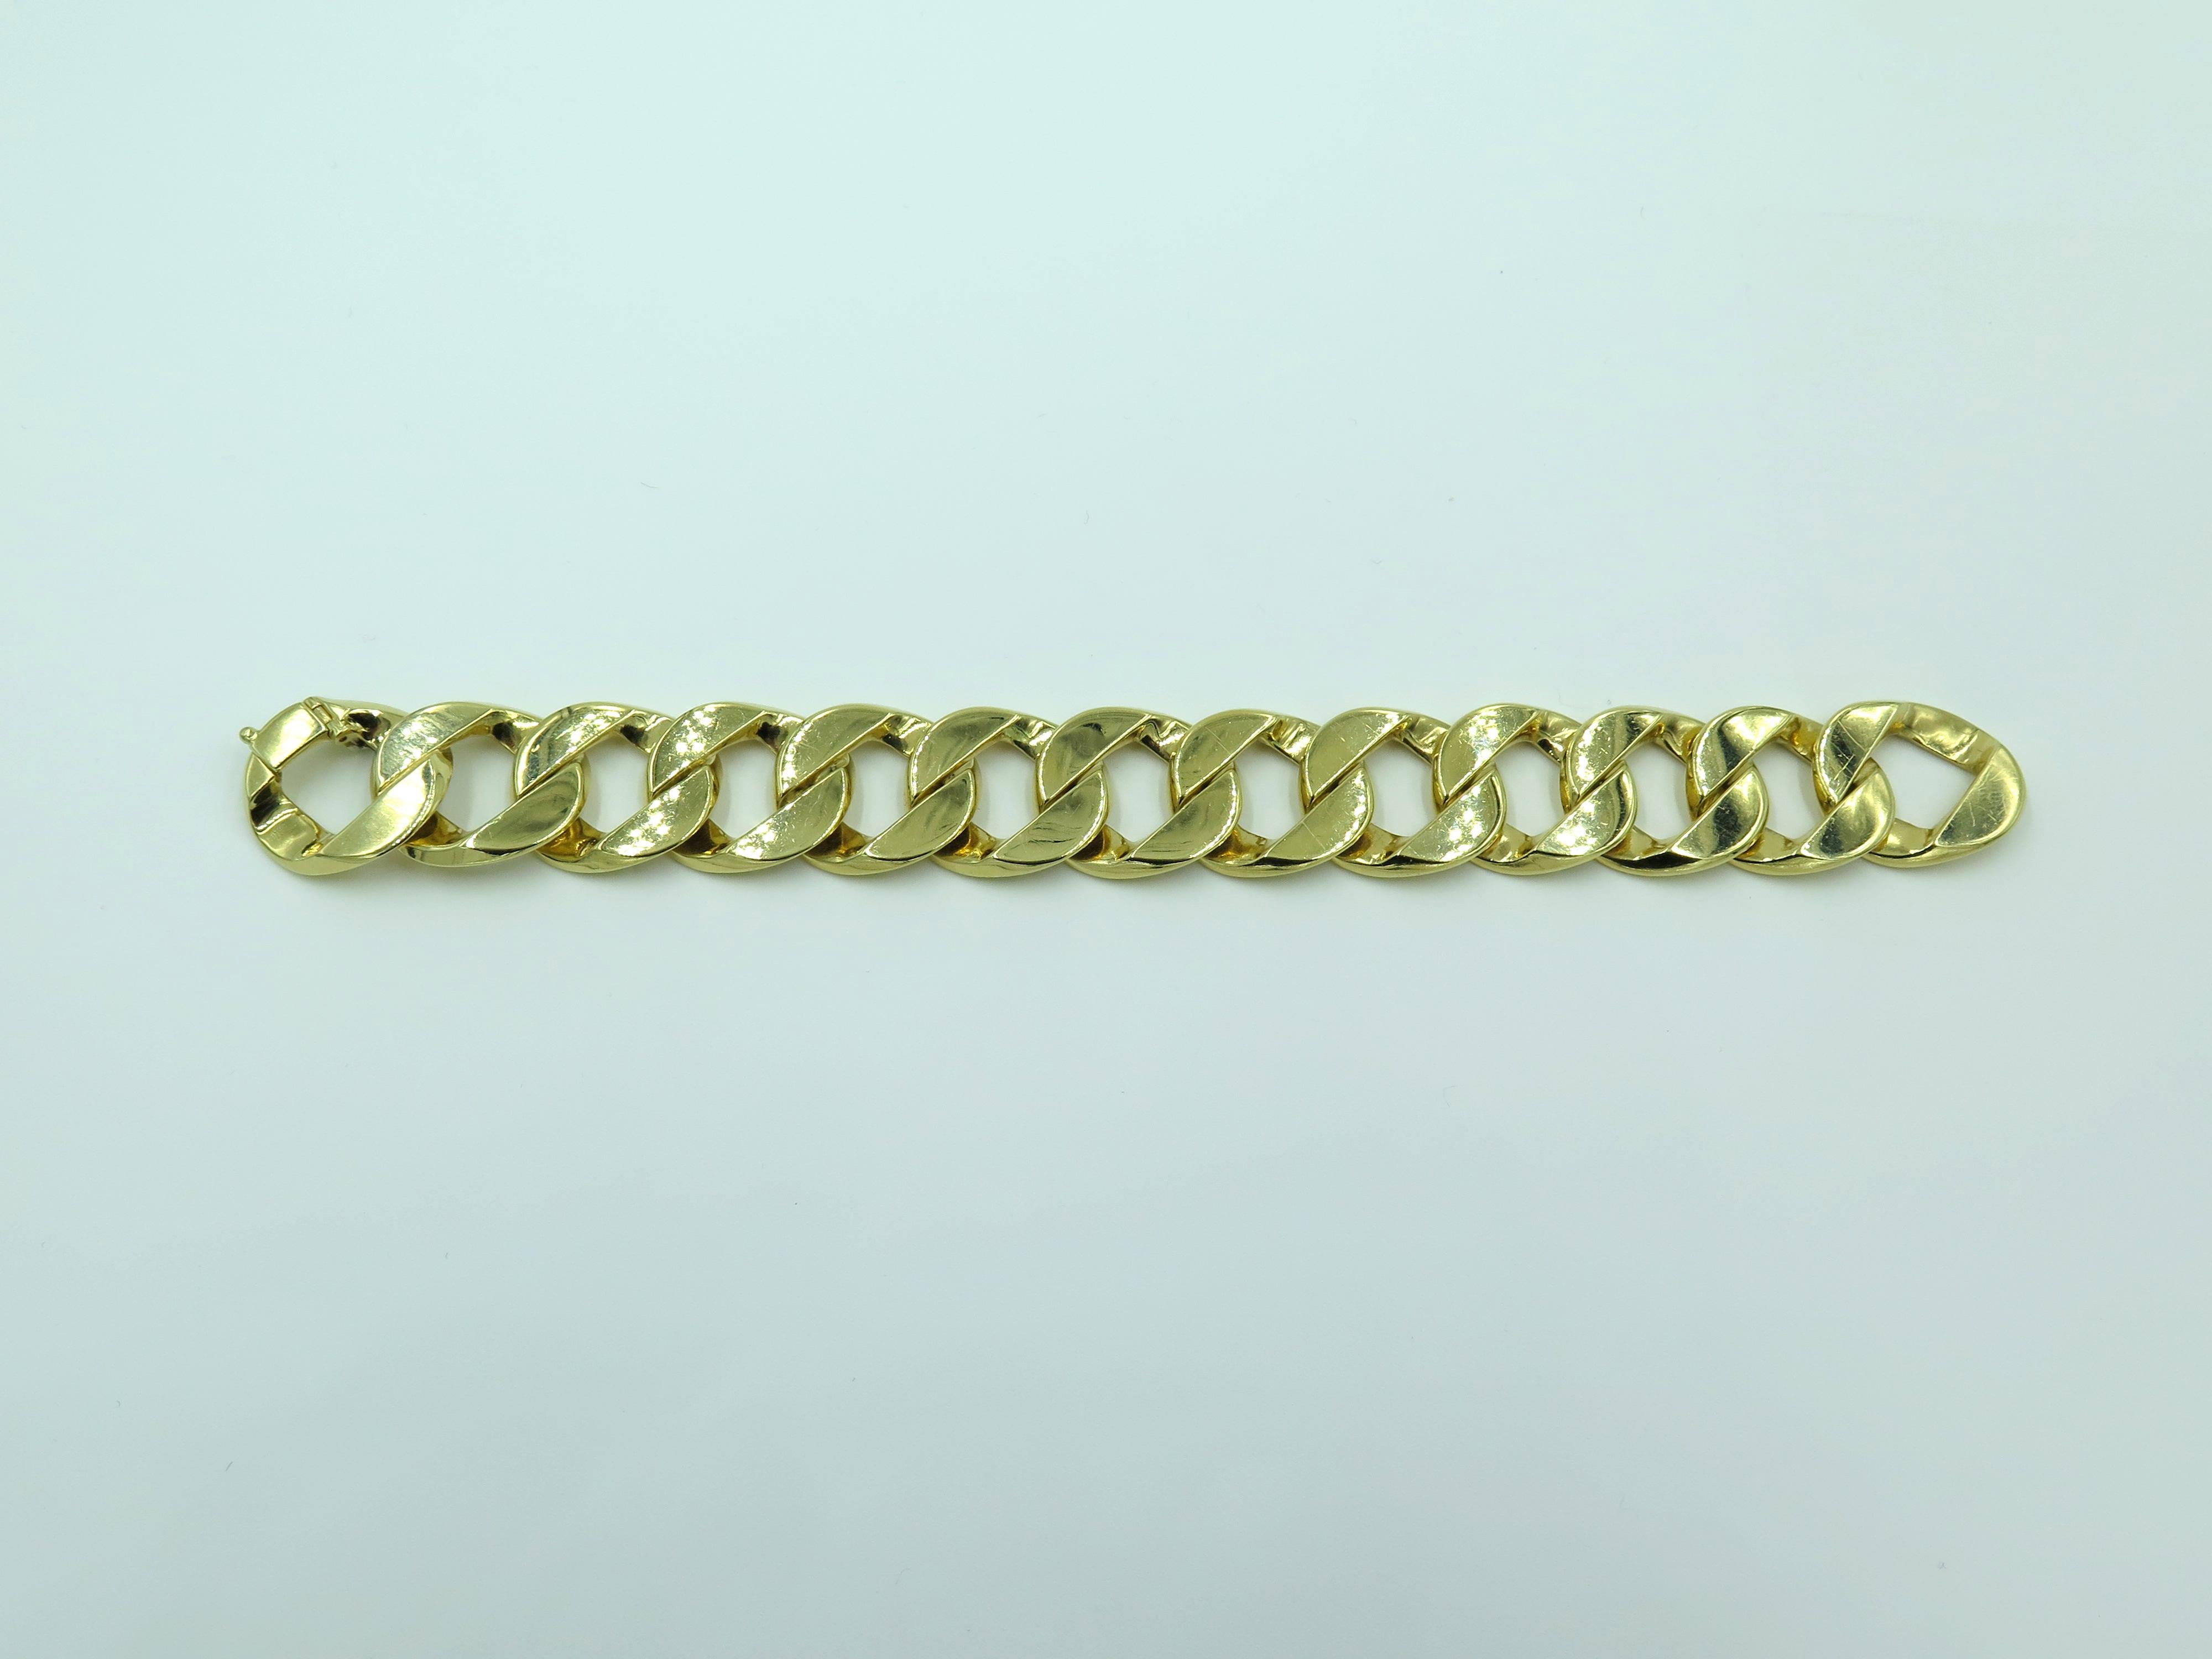 An 18 karat yellow gold Curb Link Bracelet. Verdura. Designed as a series of sculpted gold interlocking links. Length is approximately 7 1/4 inches, gross weight is approximately 97.6 grams. Stamped Verdura 750.